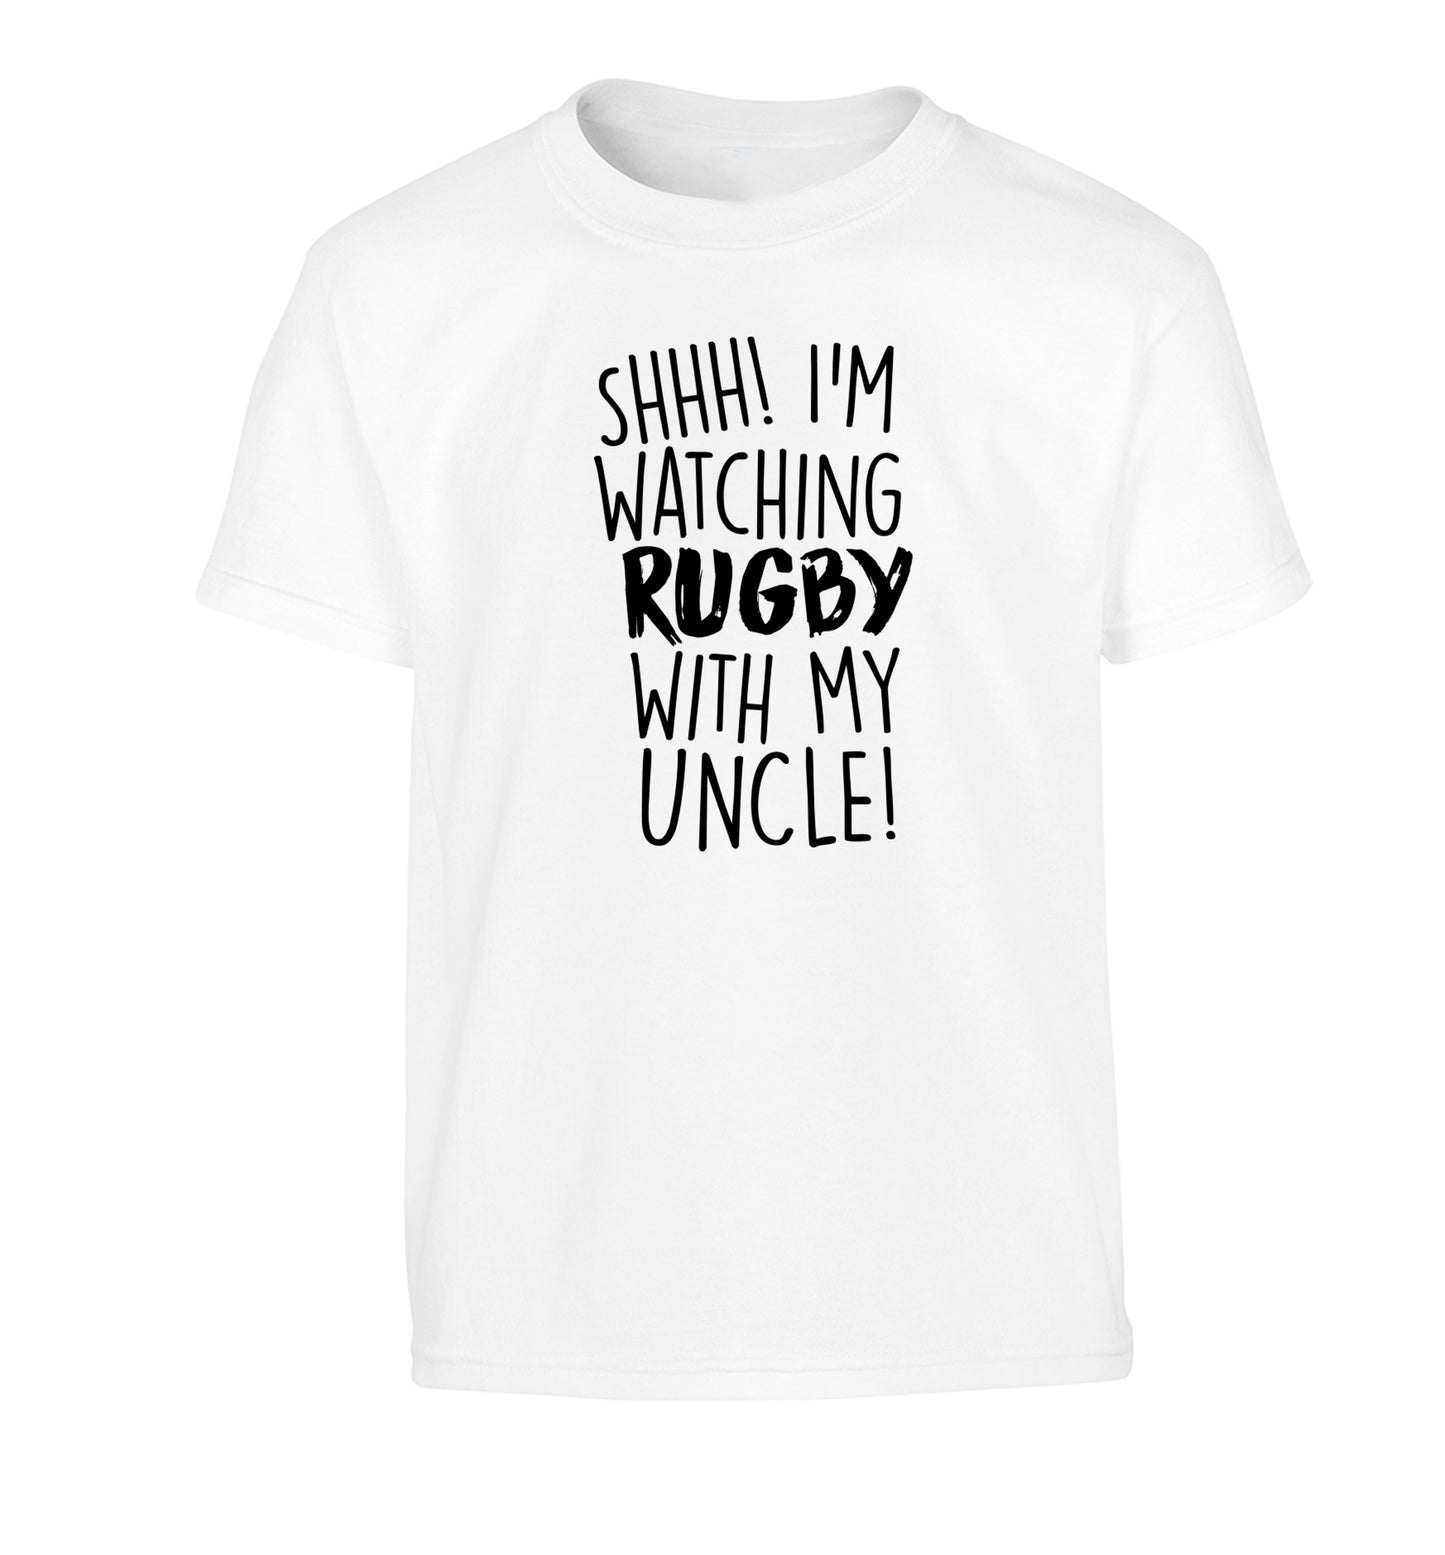 Shh.. I'm watching rugby with my uncle Children's white Tshirt 12-13 Years